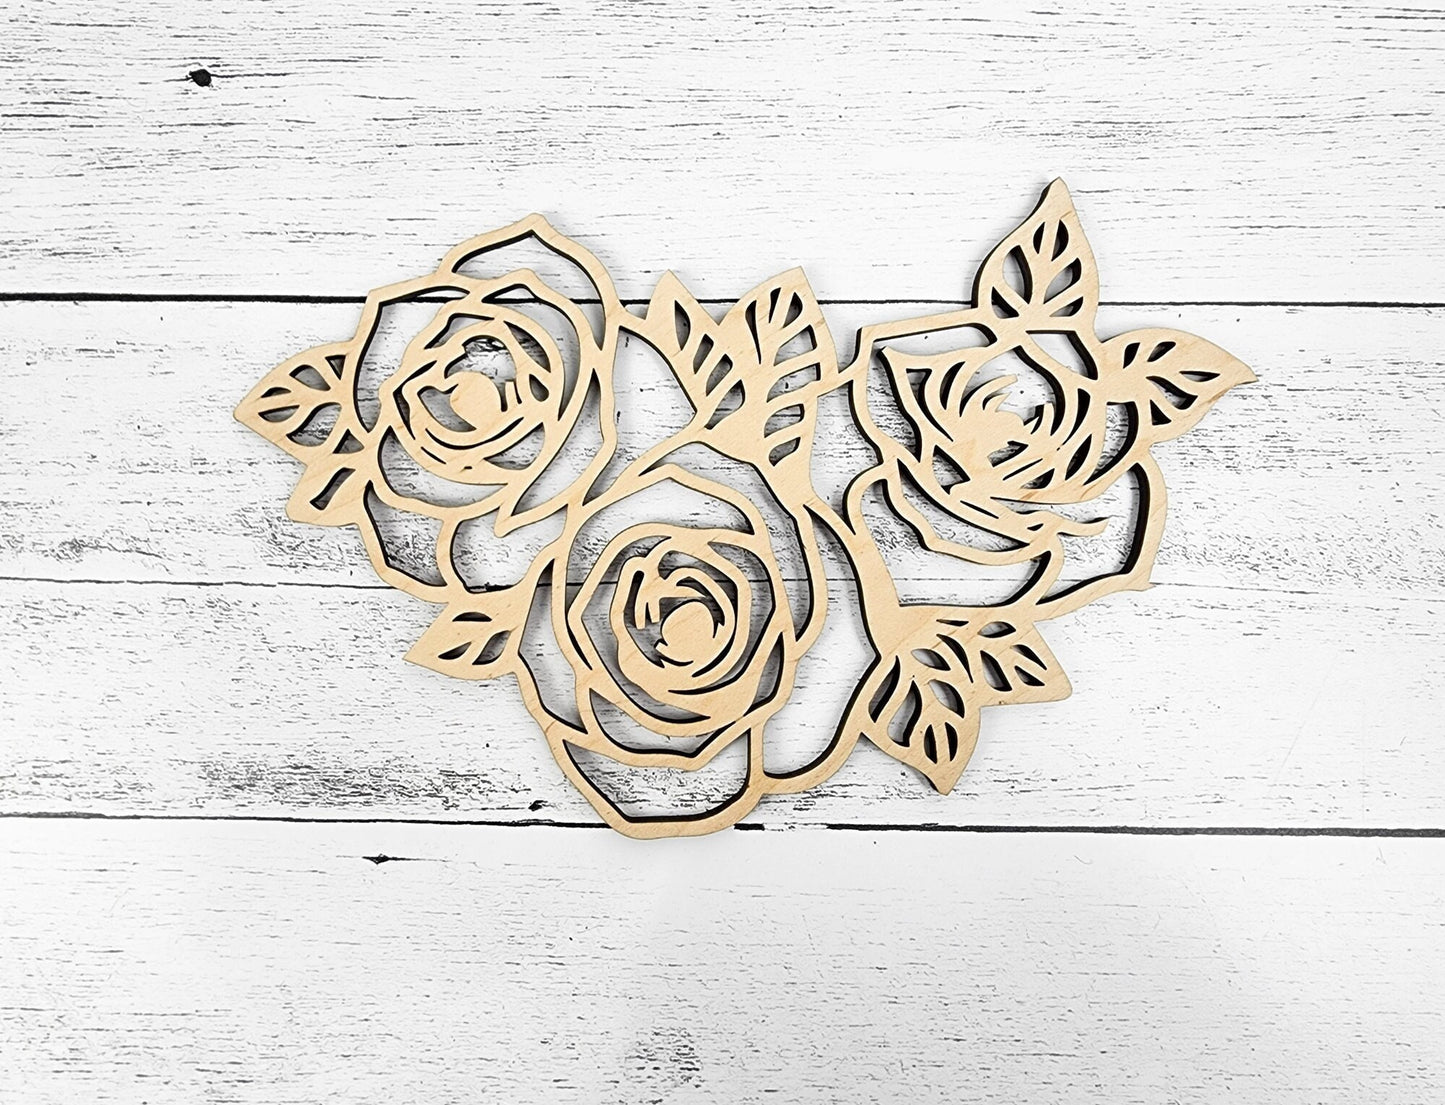 Wood Floral Rose Cut out, Flower shapes with leaves, Wooden floral pattern for signs, flowery blanks for crafts, unfinished DIY, sign making